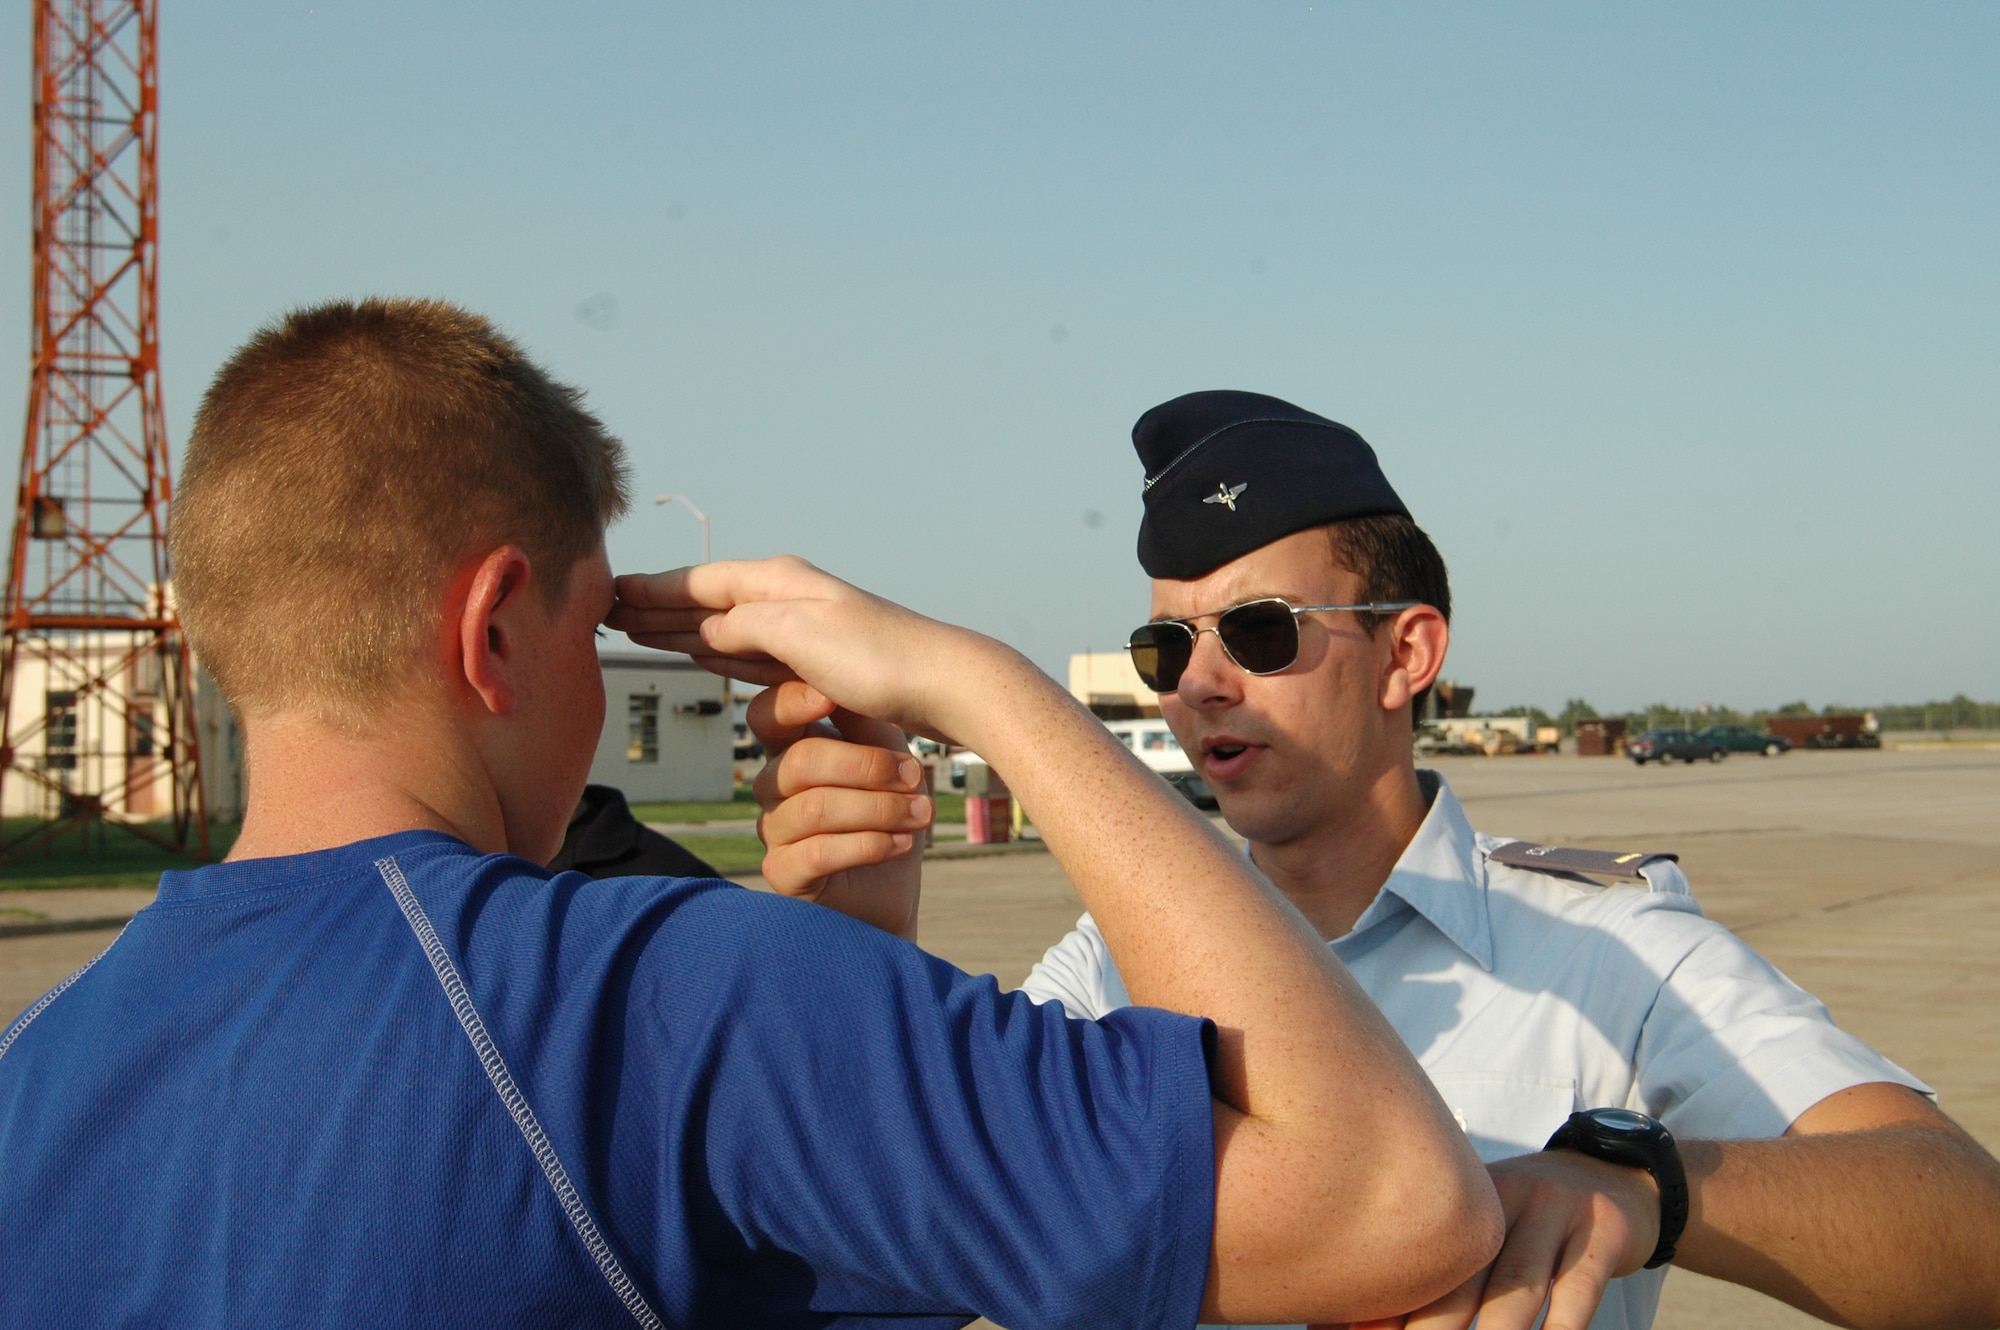 Civil Air Patrol 2nd Lt. Ryan Jones gives pointers to a new CAP recruit on the proper way to salute during a formation at their weekly meeting in Bldg. 240 here. During the meeting the cadets cover current events and brush up on aerospace education topics. (Air Force photo by Howdy Stout)